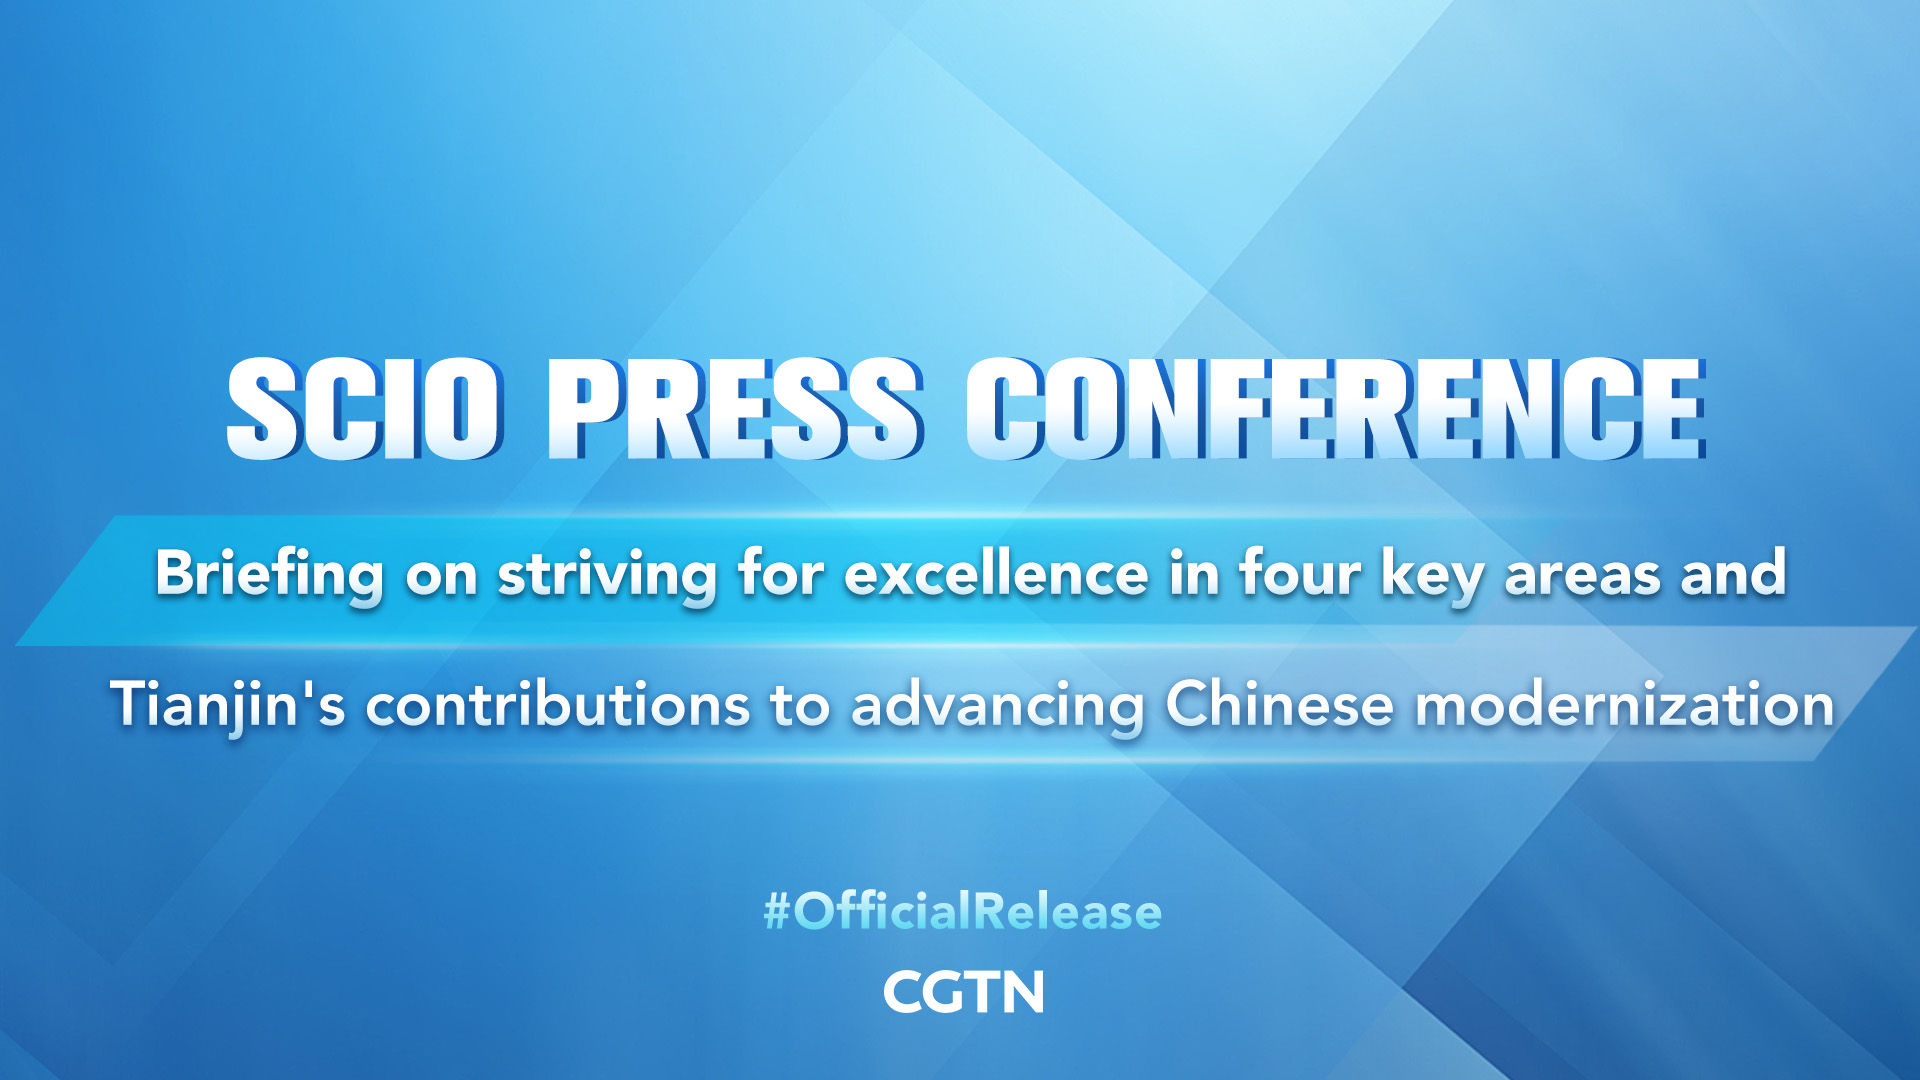 Live: Briefing on striving for excellence in four key areas and Tianjin's contributions to advancing Chinese modernization